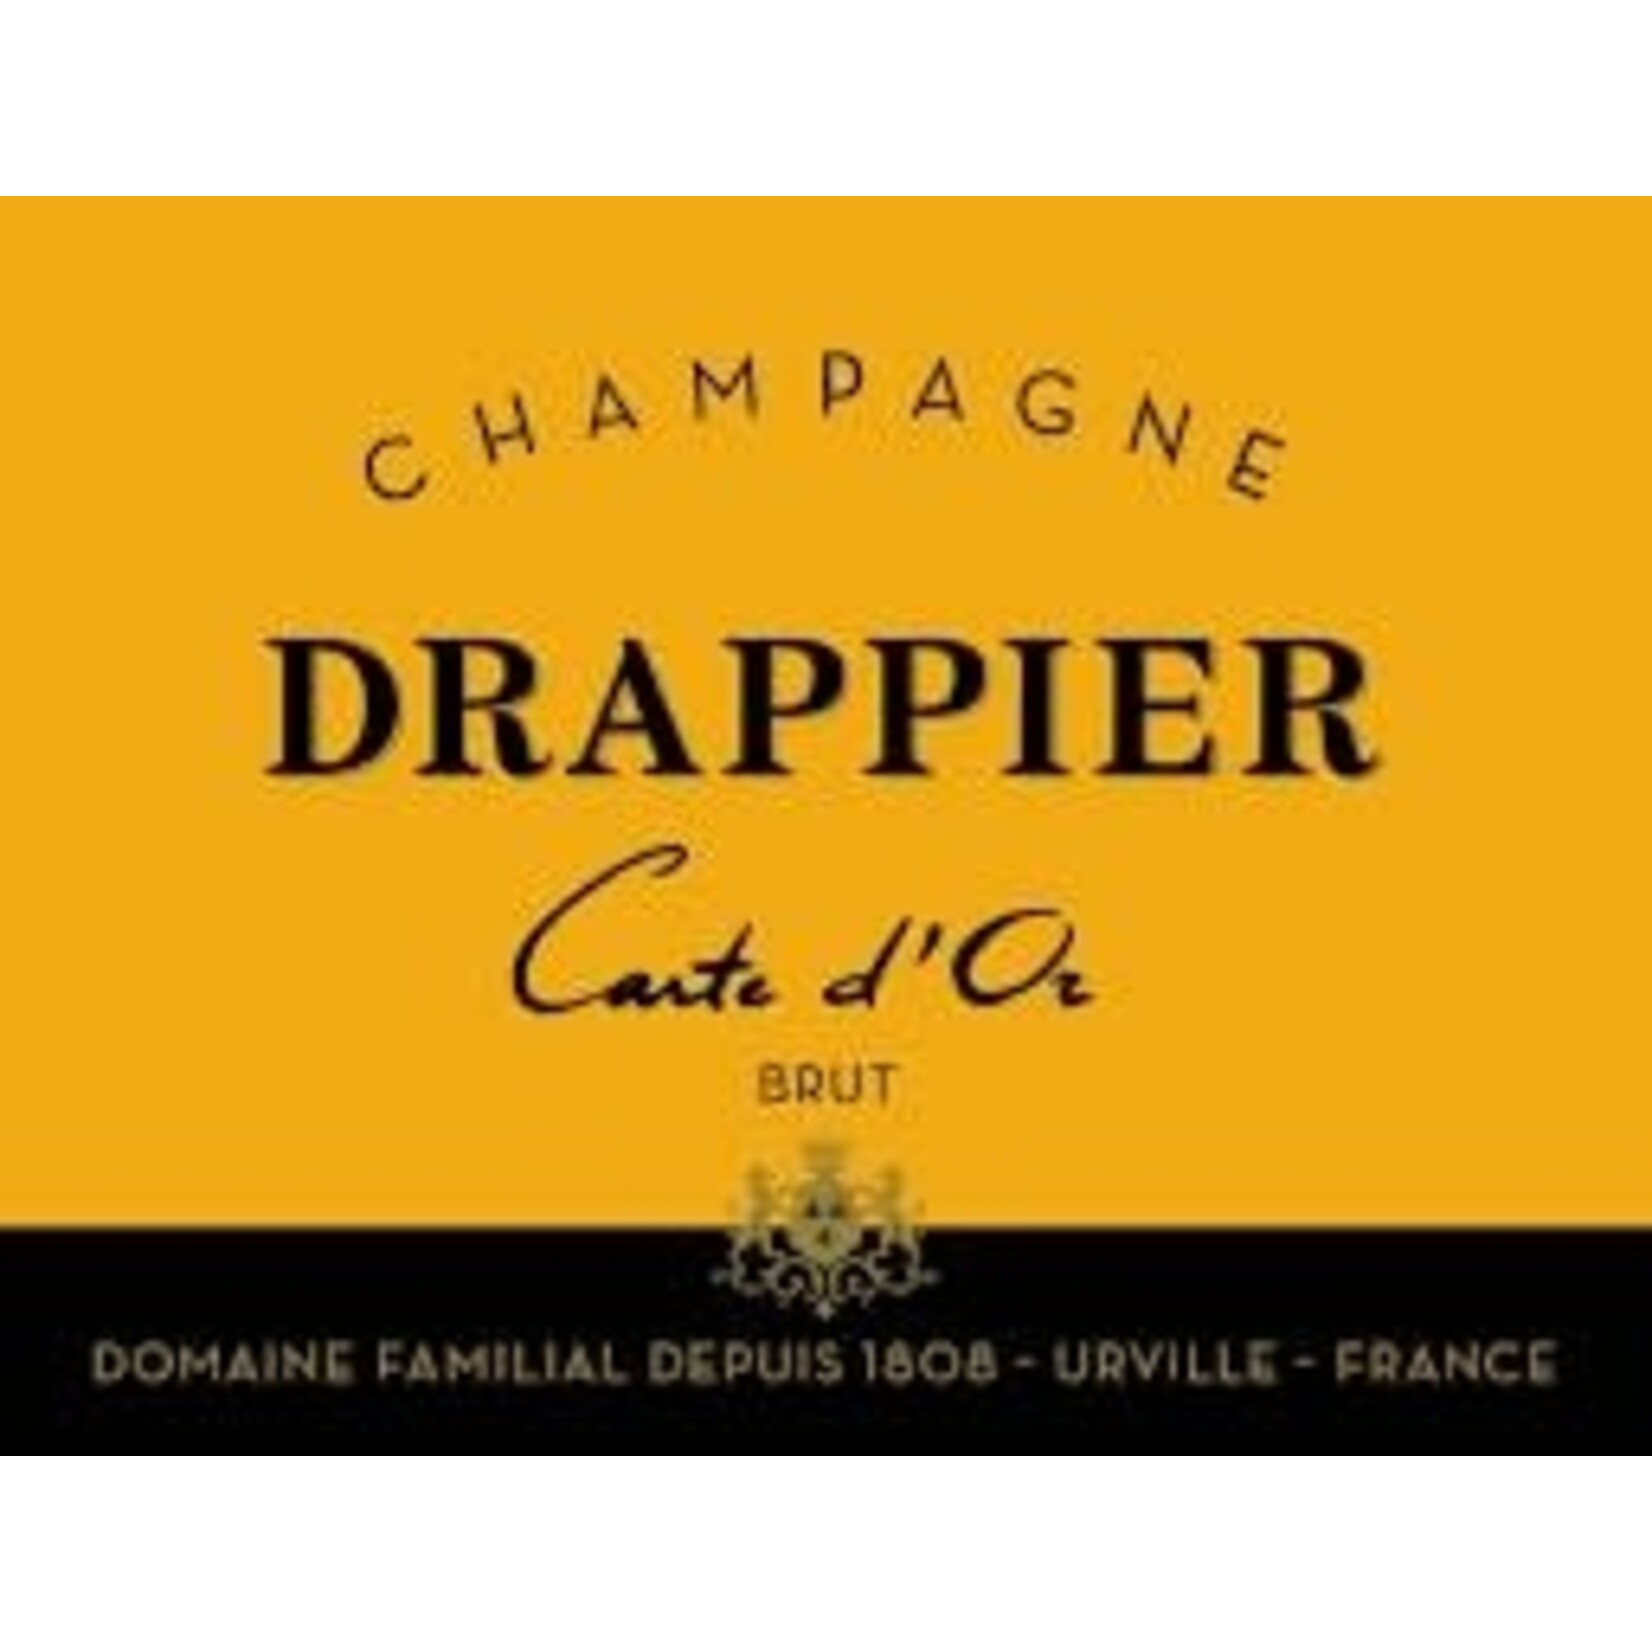 Drappier Drappier Carte D' Or Brut Champagne Champagne, France 90pts-WS